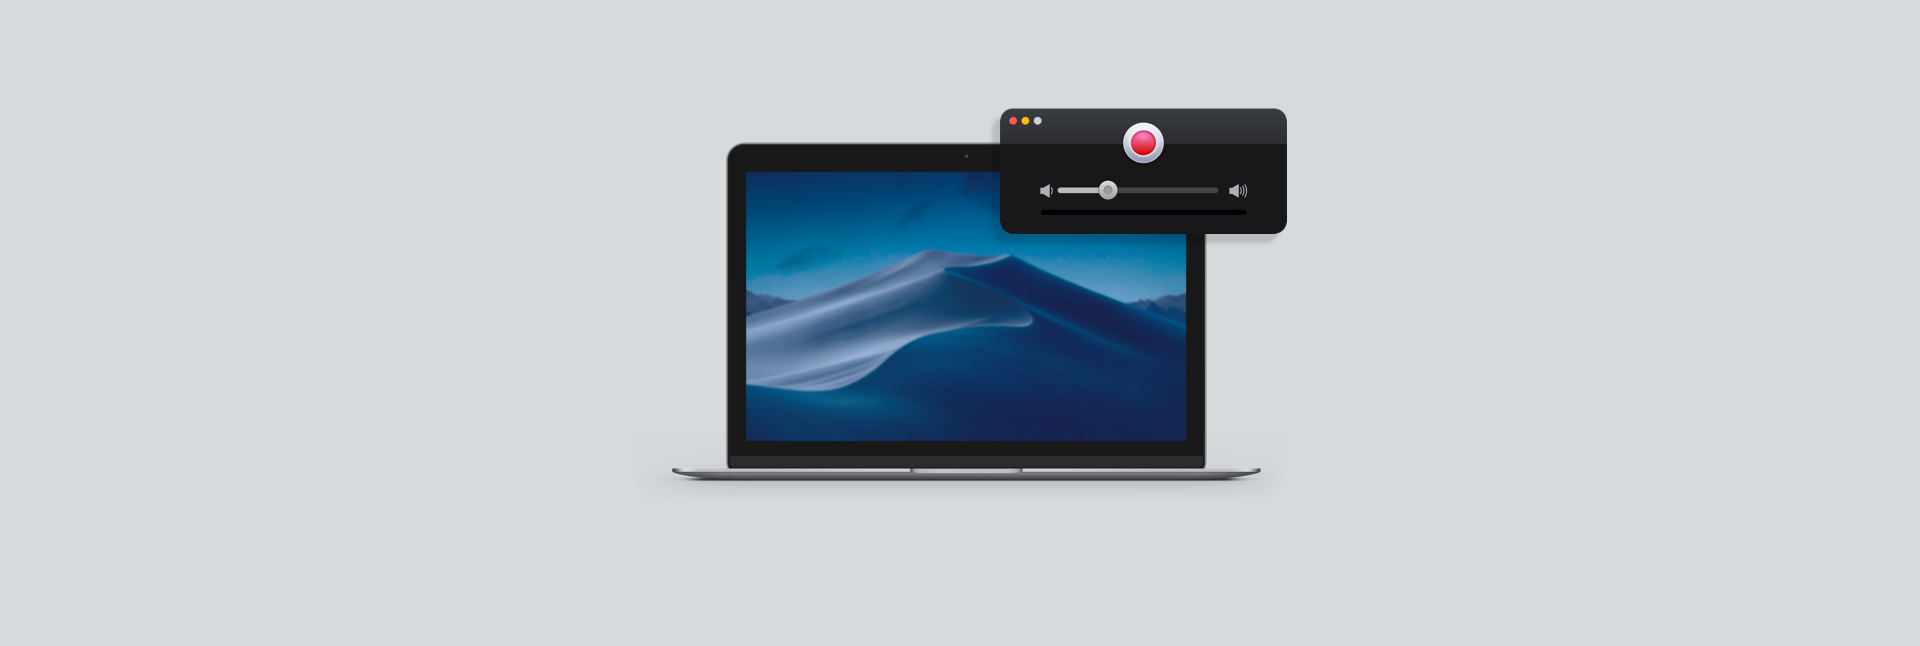 how to record myself on macbook